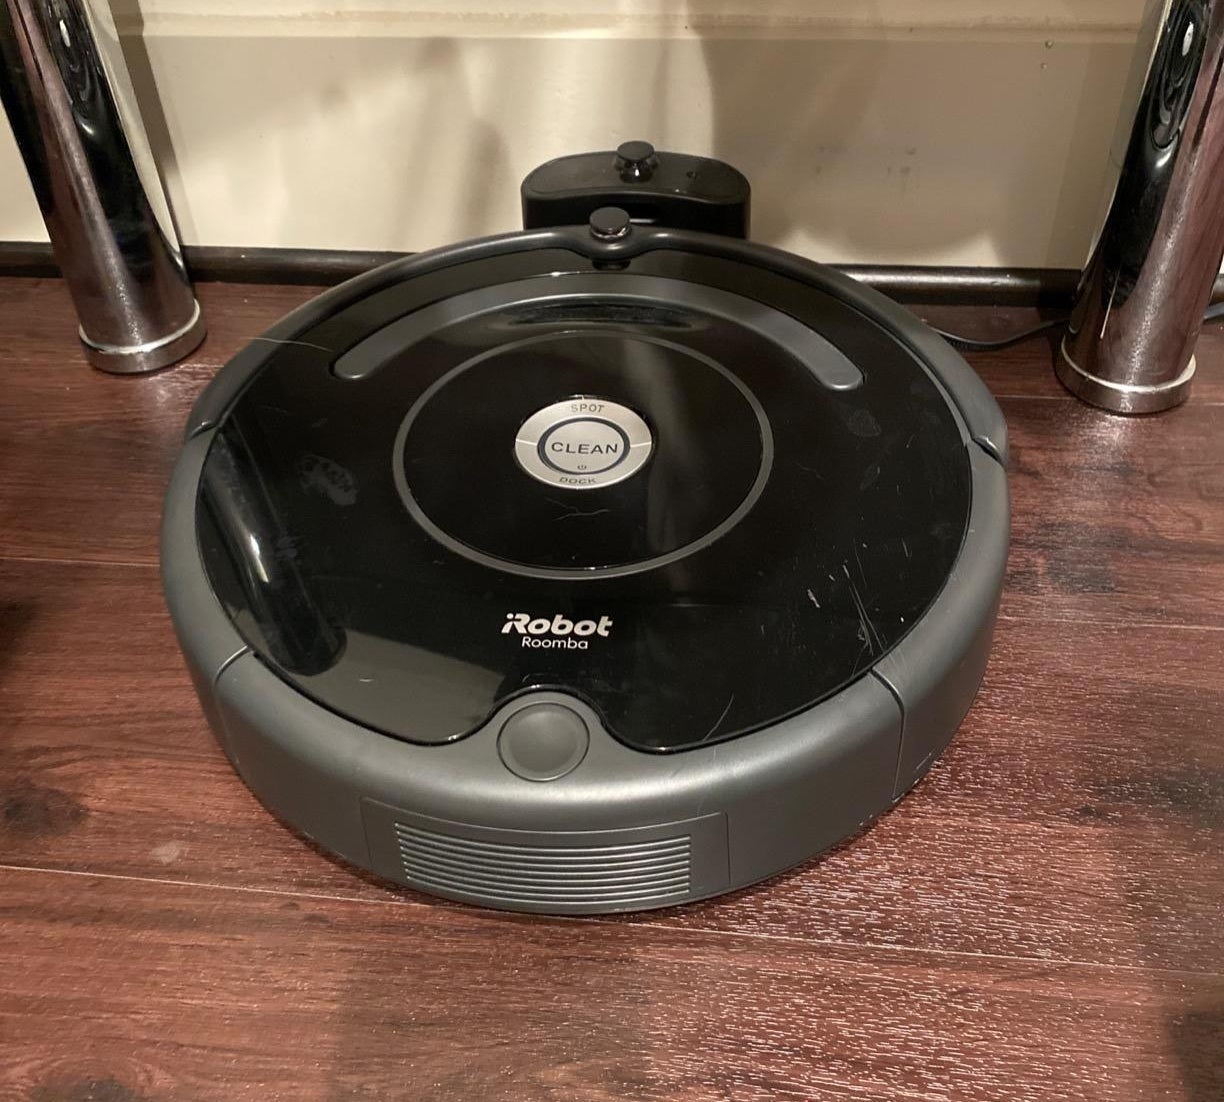 A close-up of the Roomba